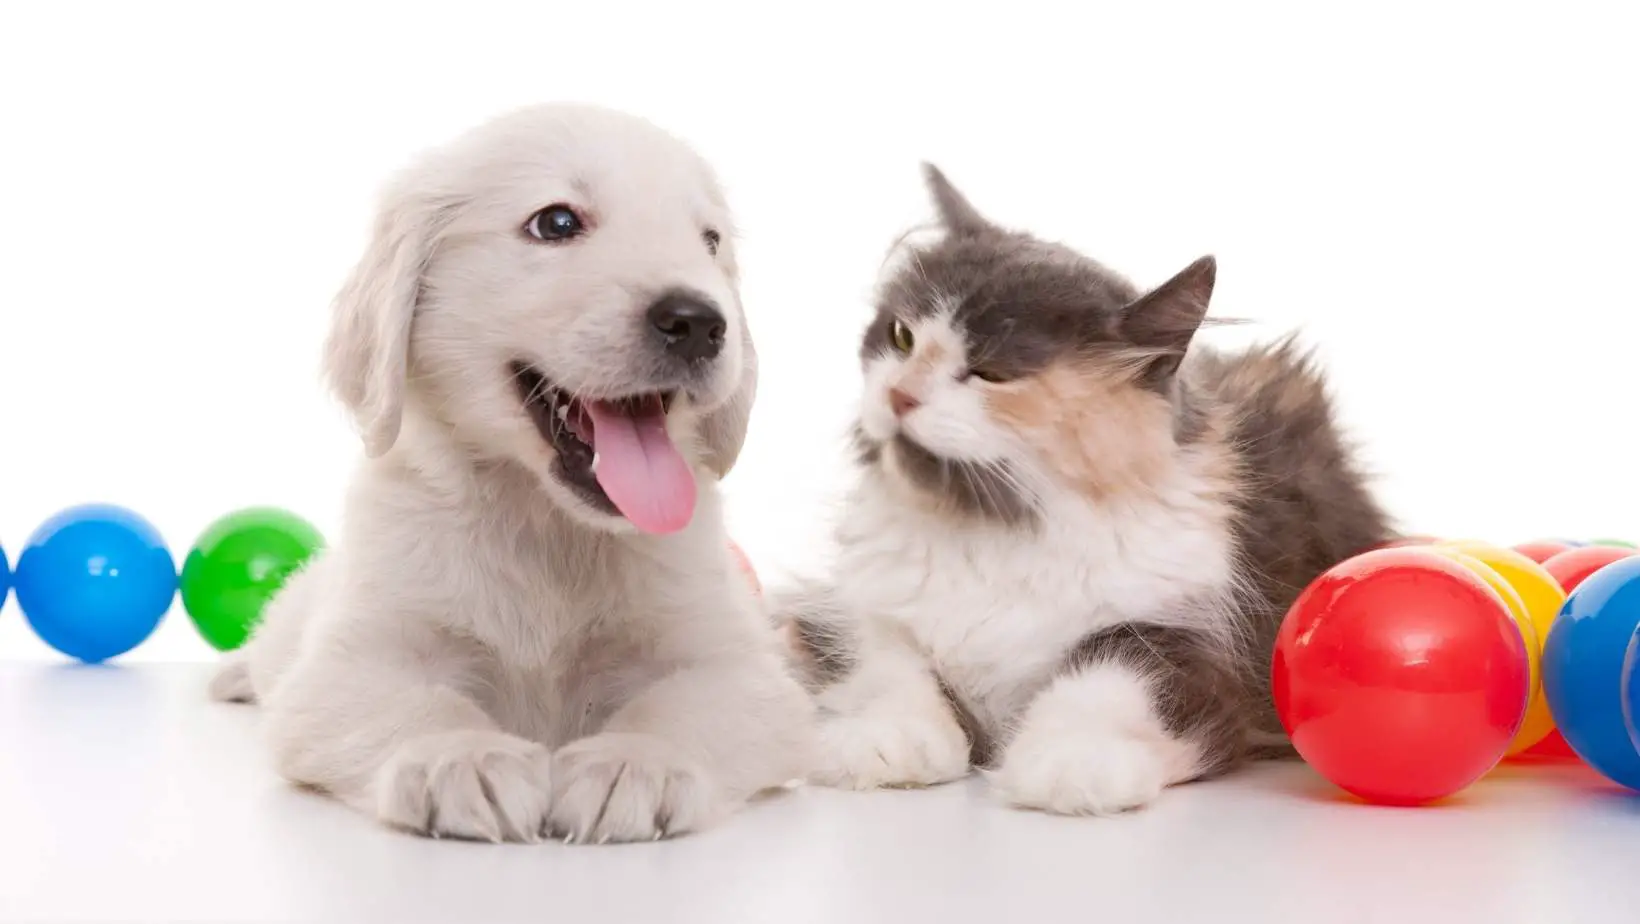 Do Cats Or Dogs Have Better Smell?